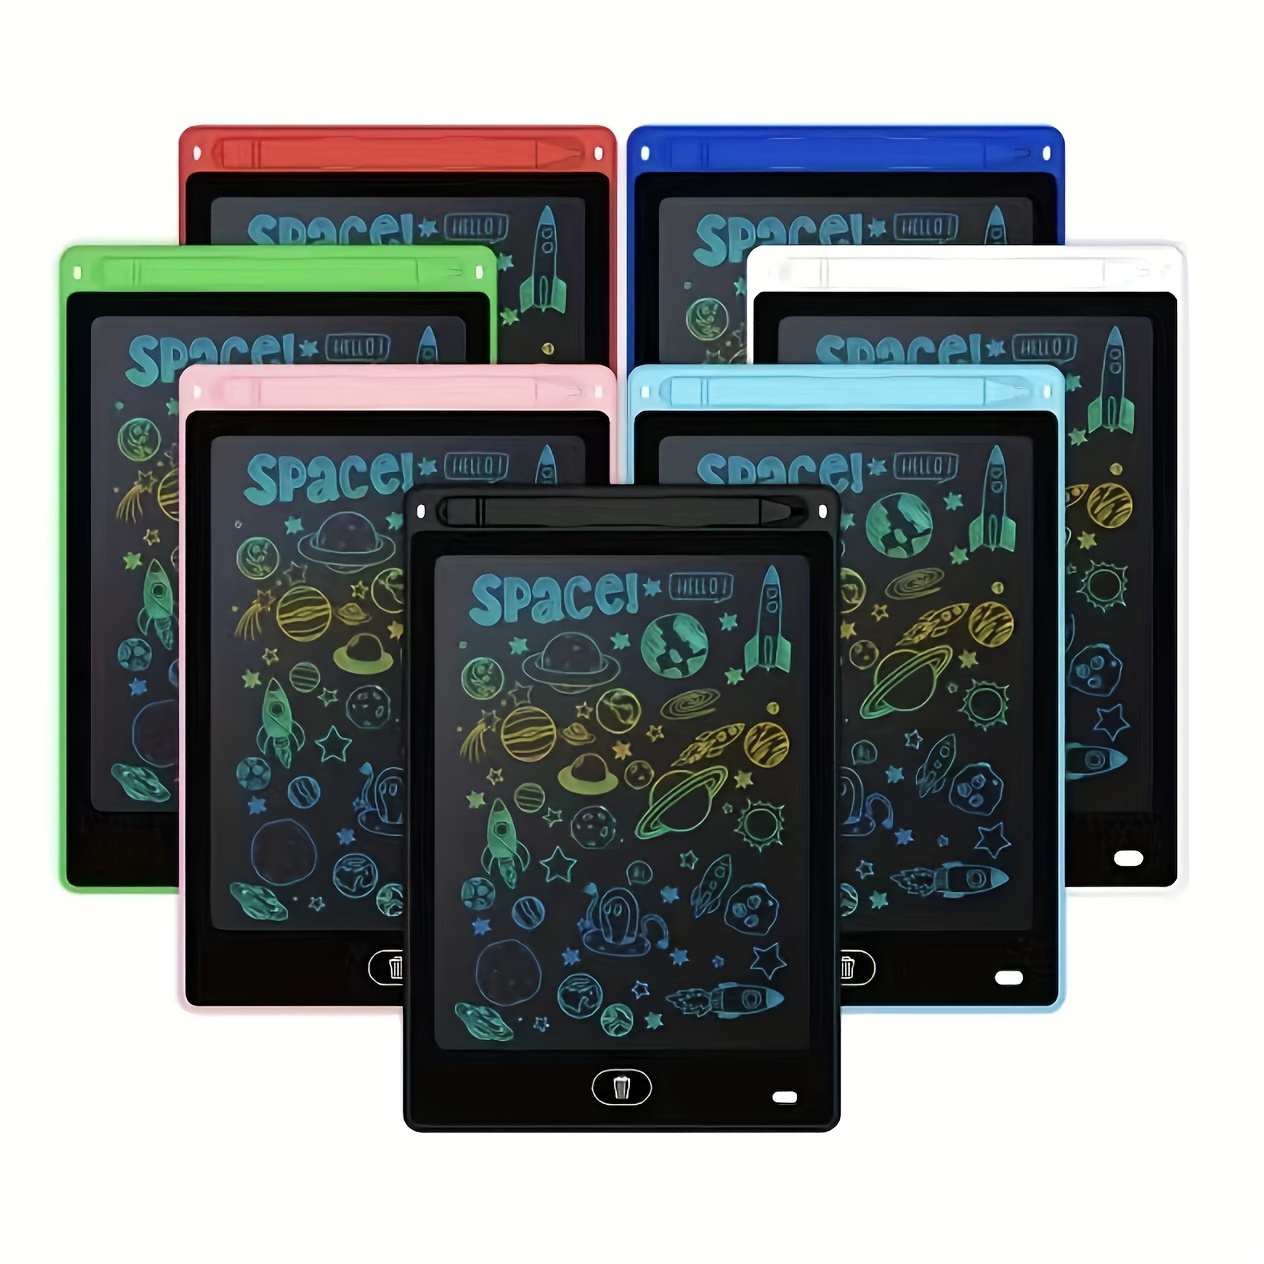 

16/12/8.5/6.5 Inch Lcd Writing Tablet Doodle Board For Kids Electronic Blackboard, Draw & Write On Colorful Screen At Home, School & Office! Halloween/christmas Thanksgiving Gift